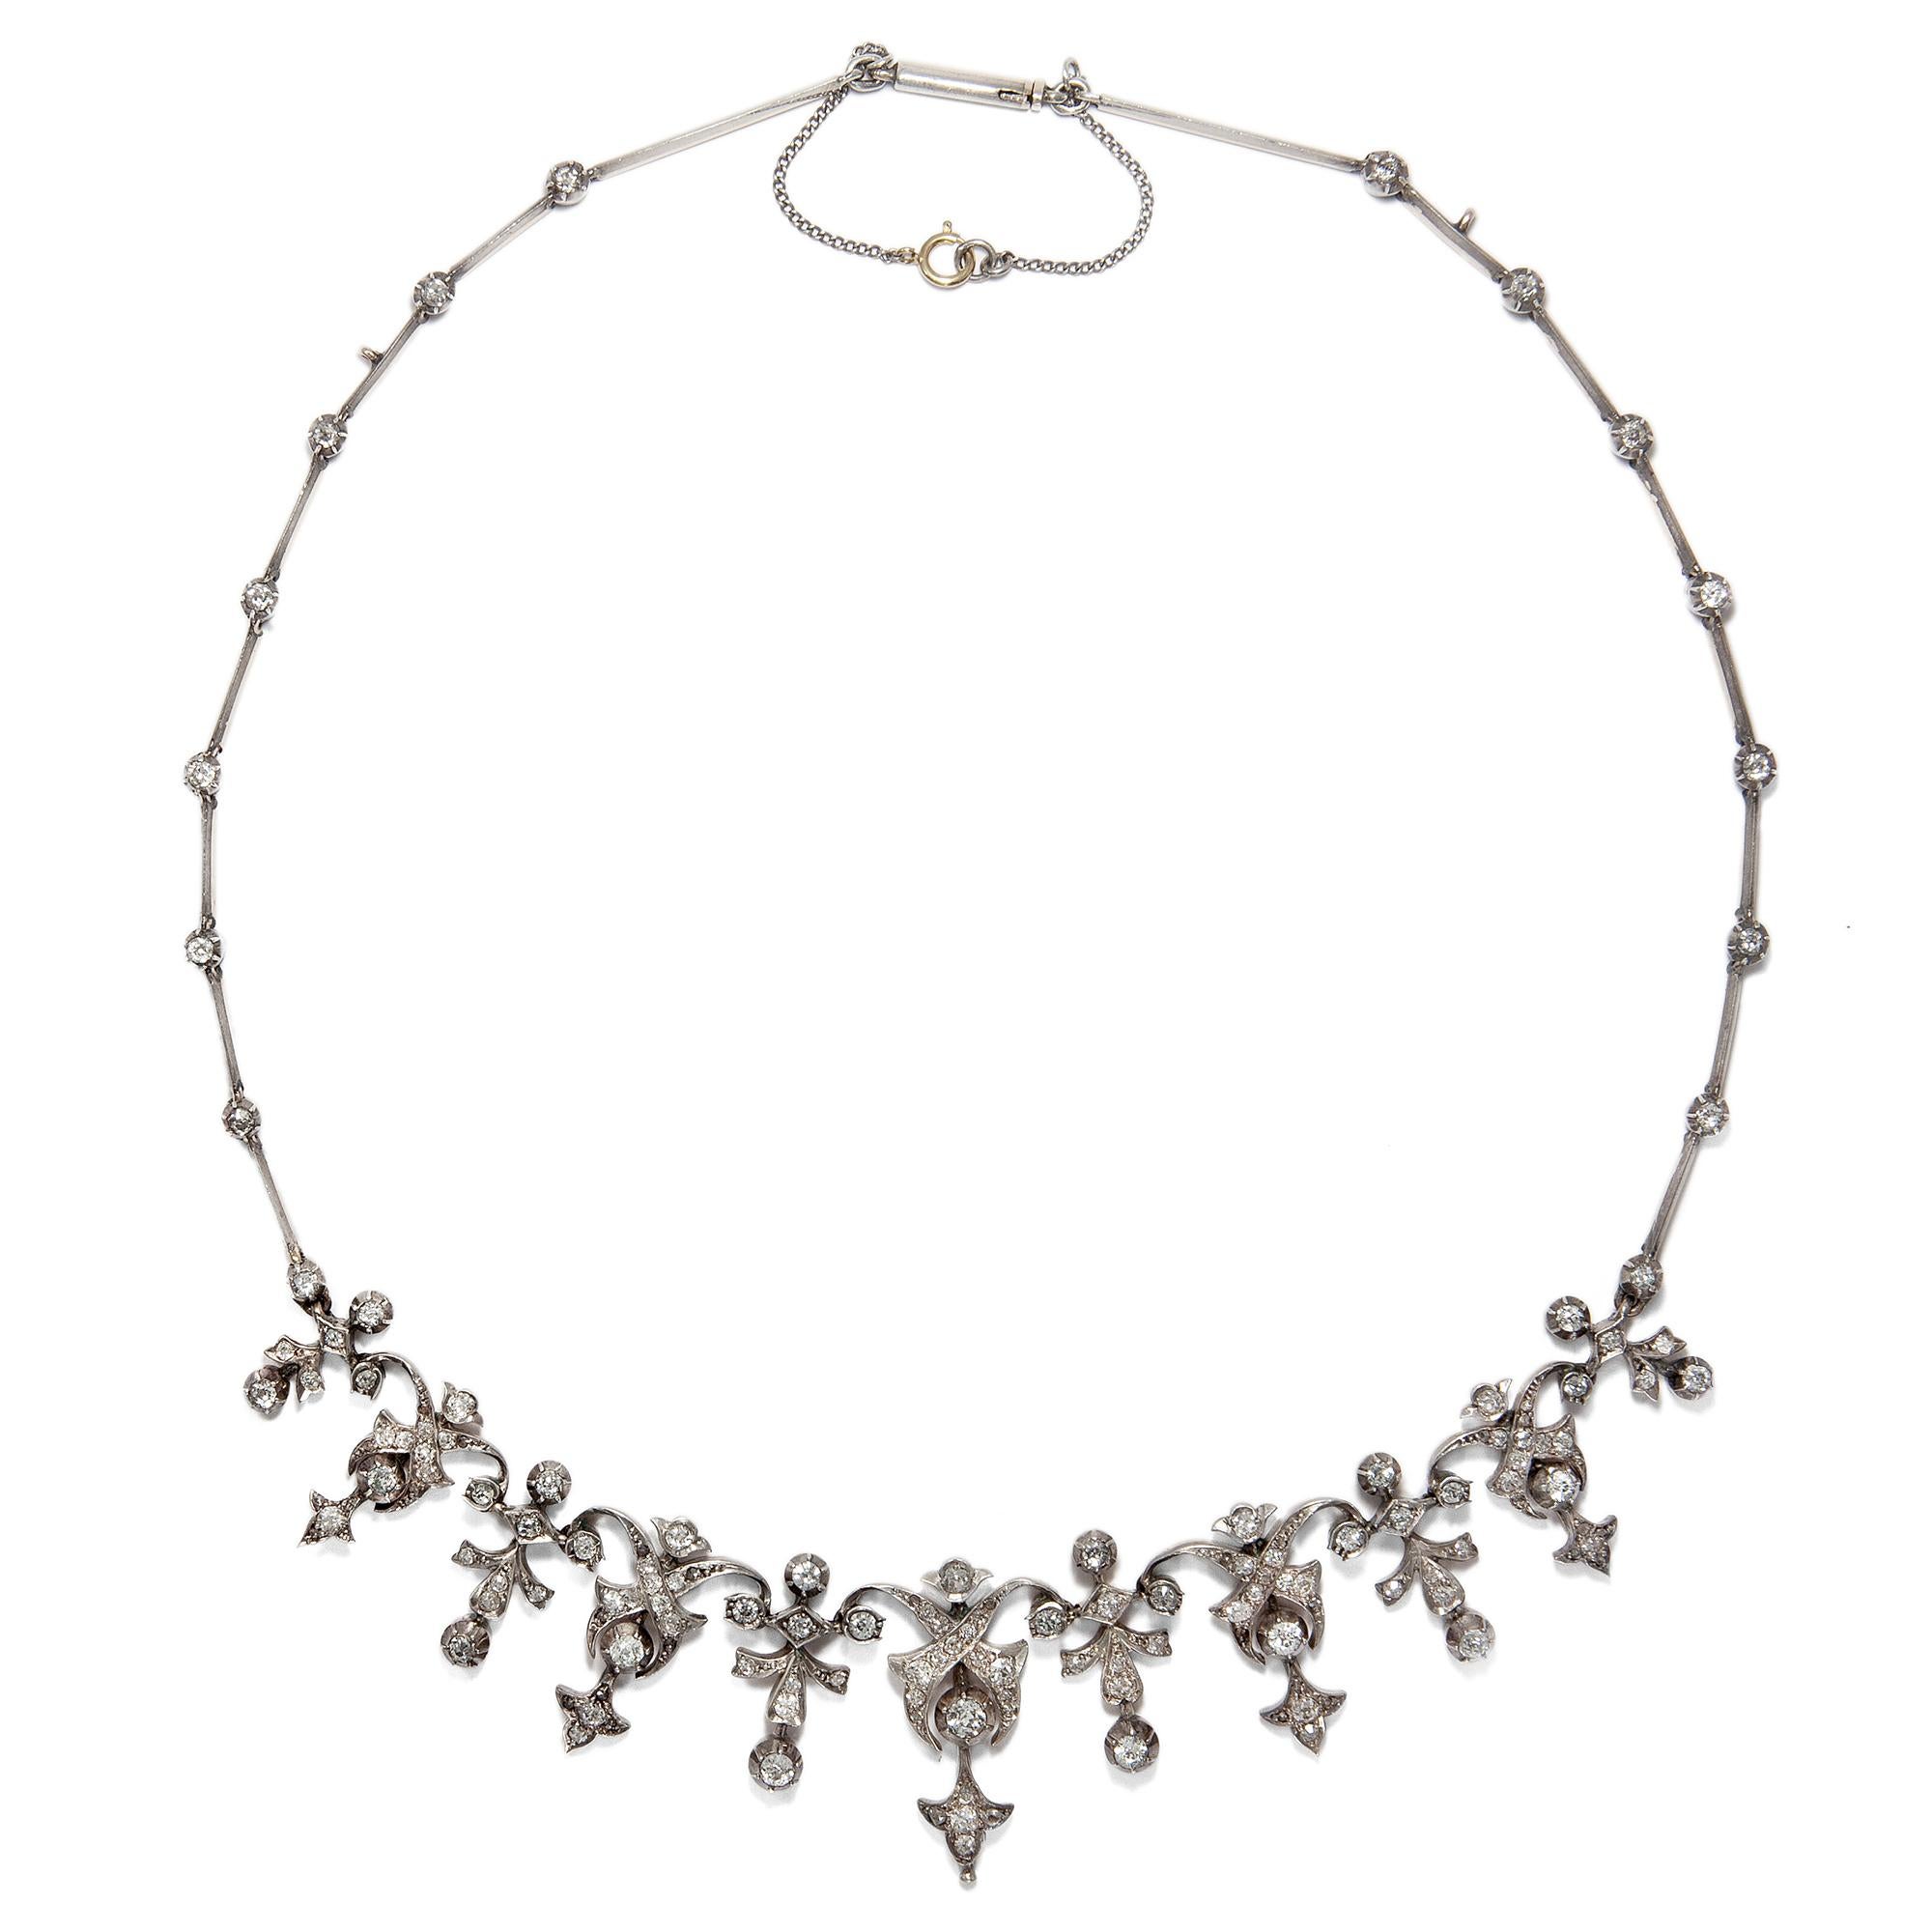 The splendid diamond necklace at hand was fashioned in the late 19th century. Its creator's goal was to let the diamonds appear as bright and glistening as possible, using the latest techniques of his time. 

White gold had not yet been invented,